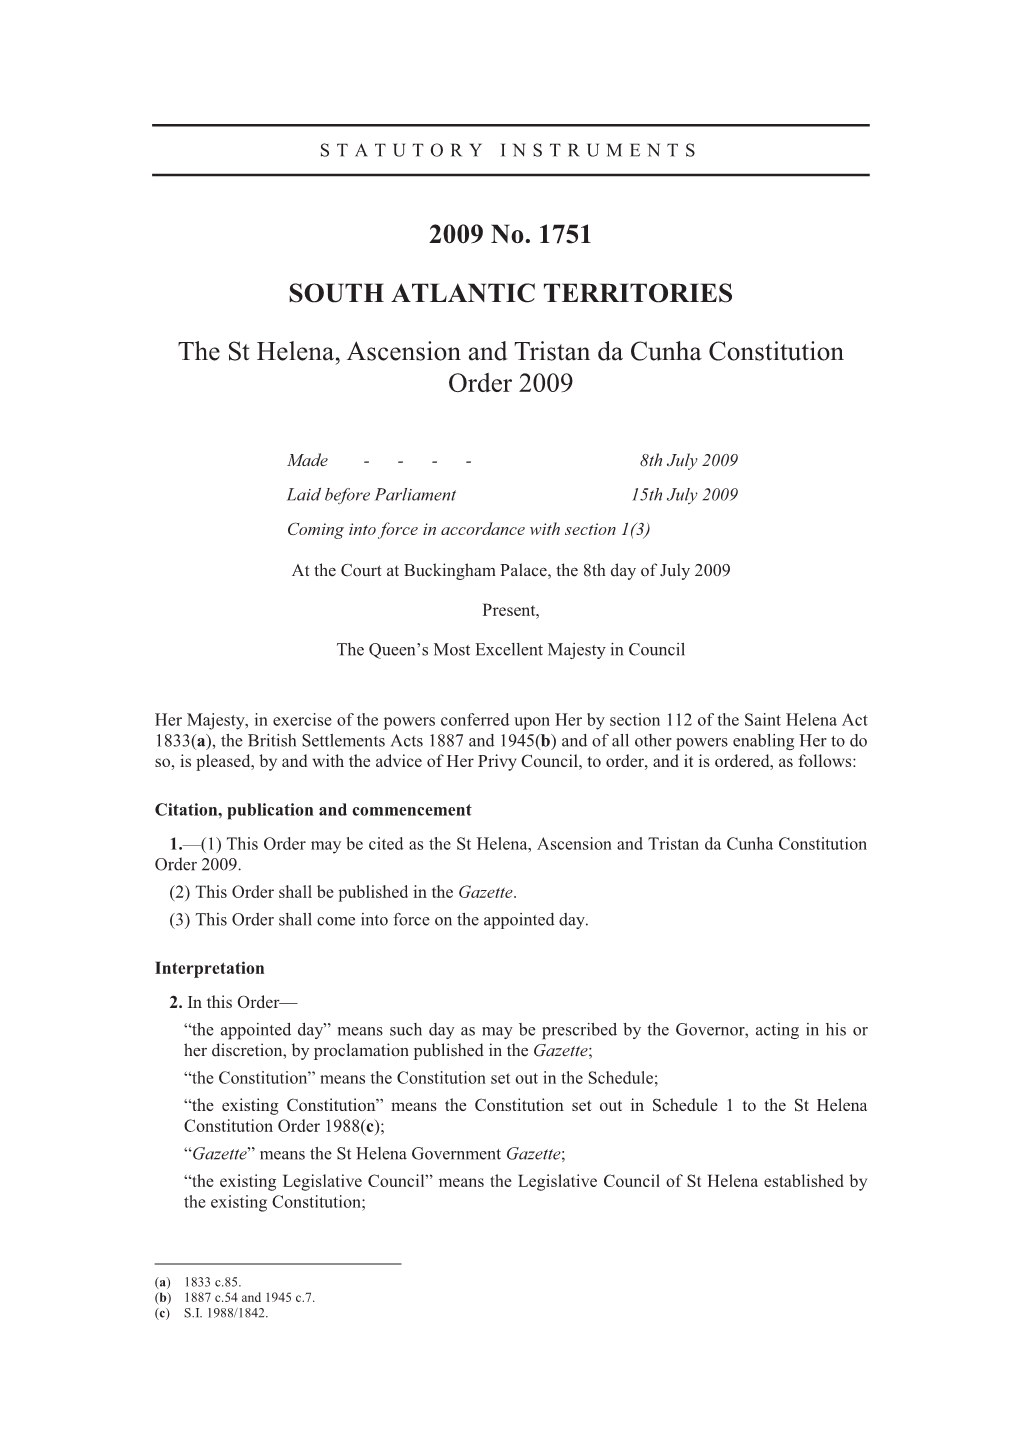 St Helena, Ascension and Tristan Da Cunha Constitution Order 2009